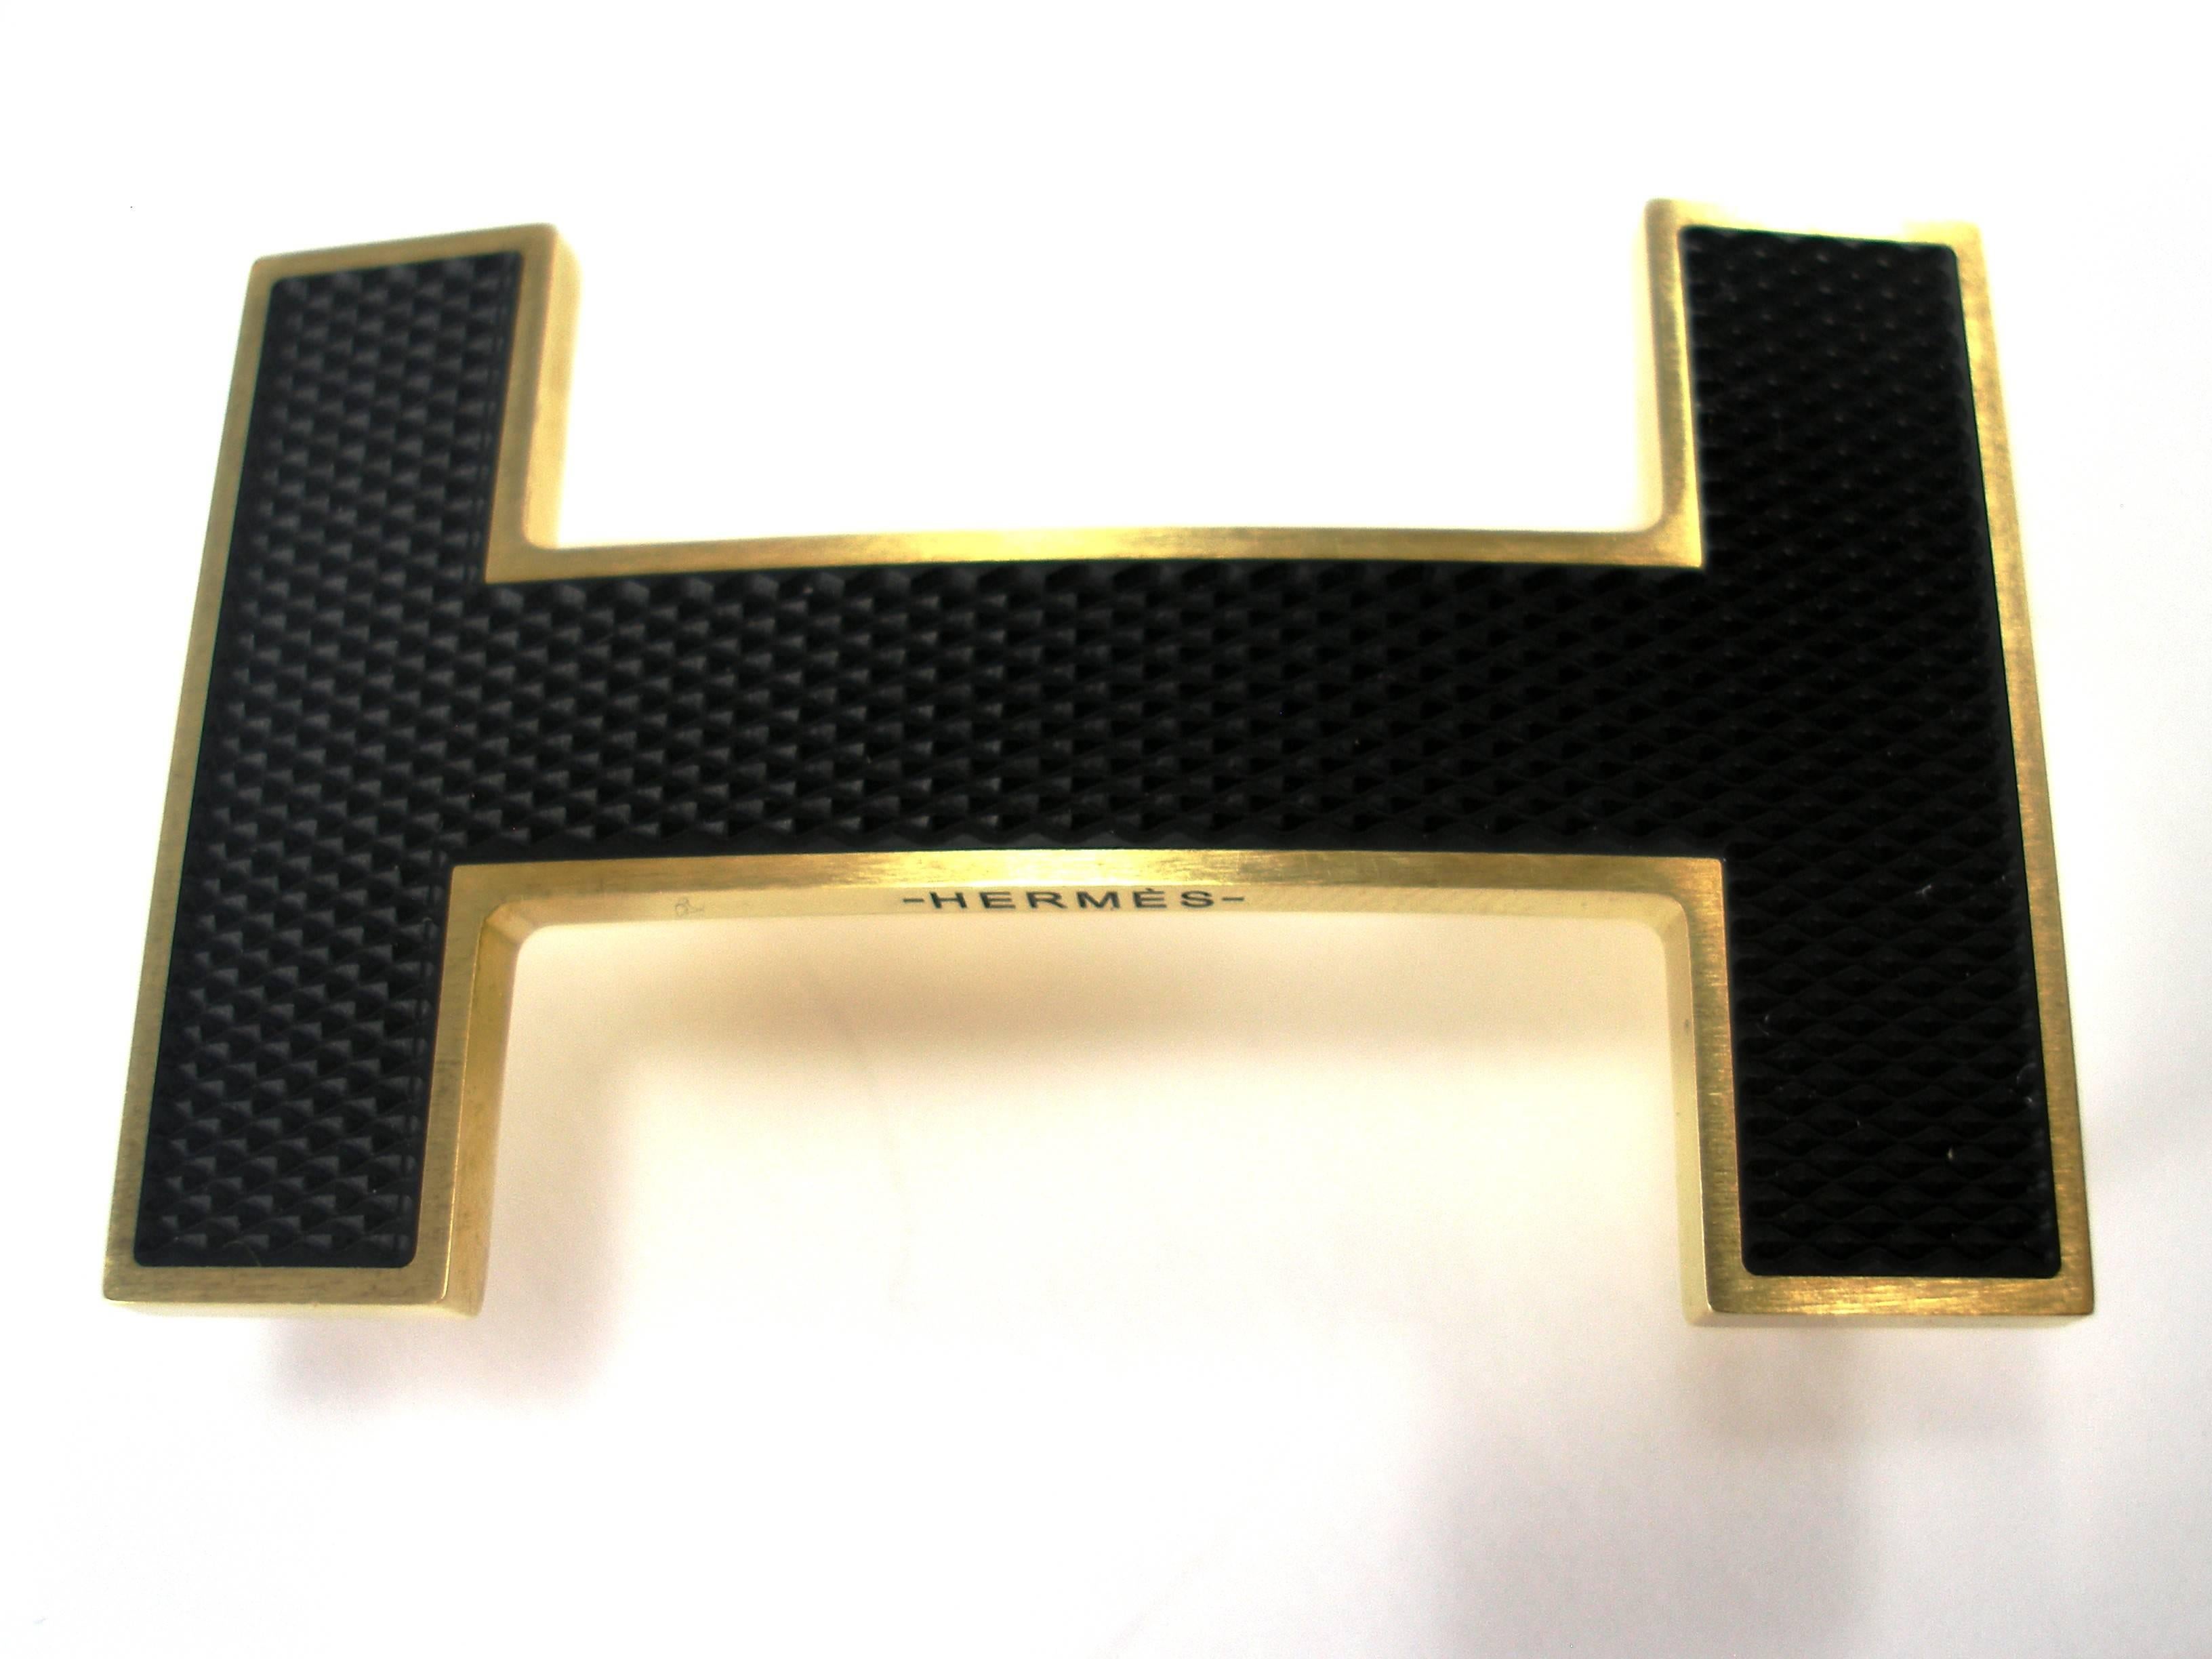 Hermes QUIZZ belt buckle 32mm black and gold  1